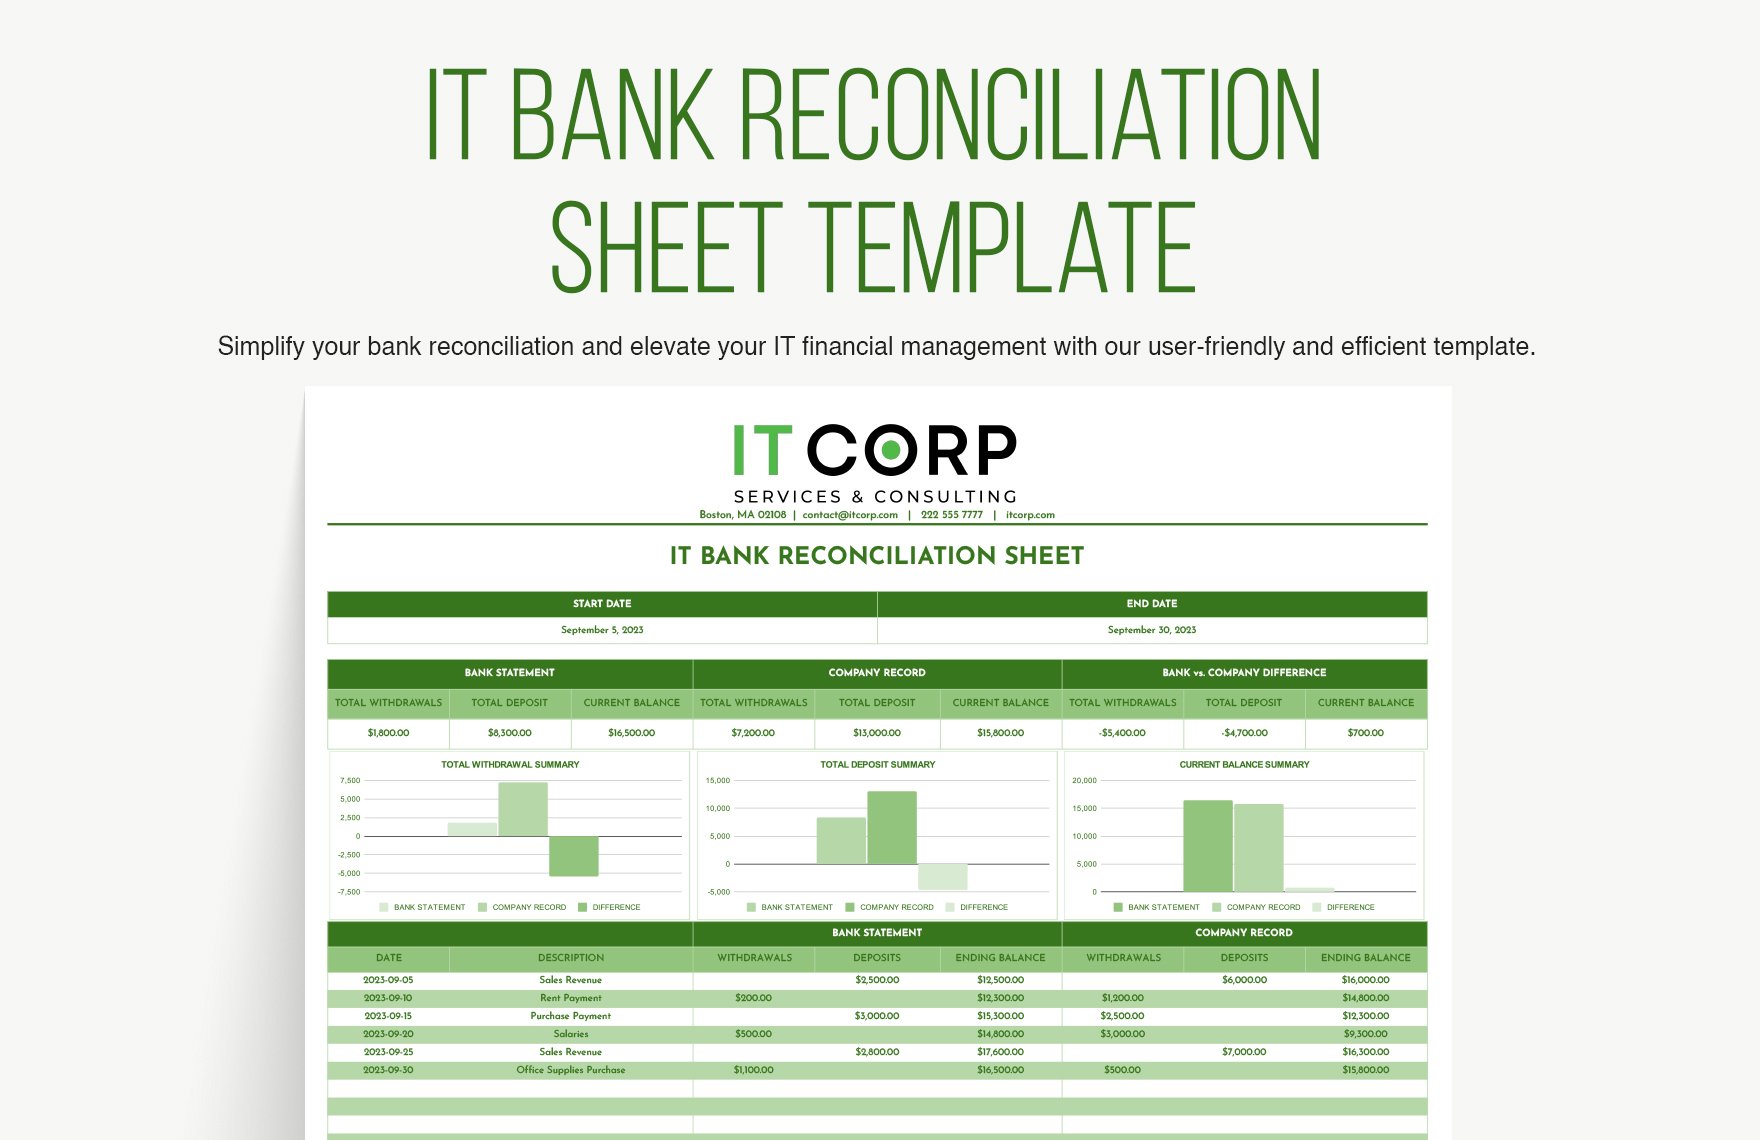 IT Bank Reconciliation Sheet Template